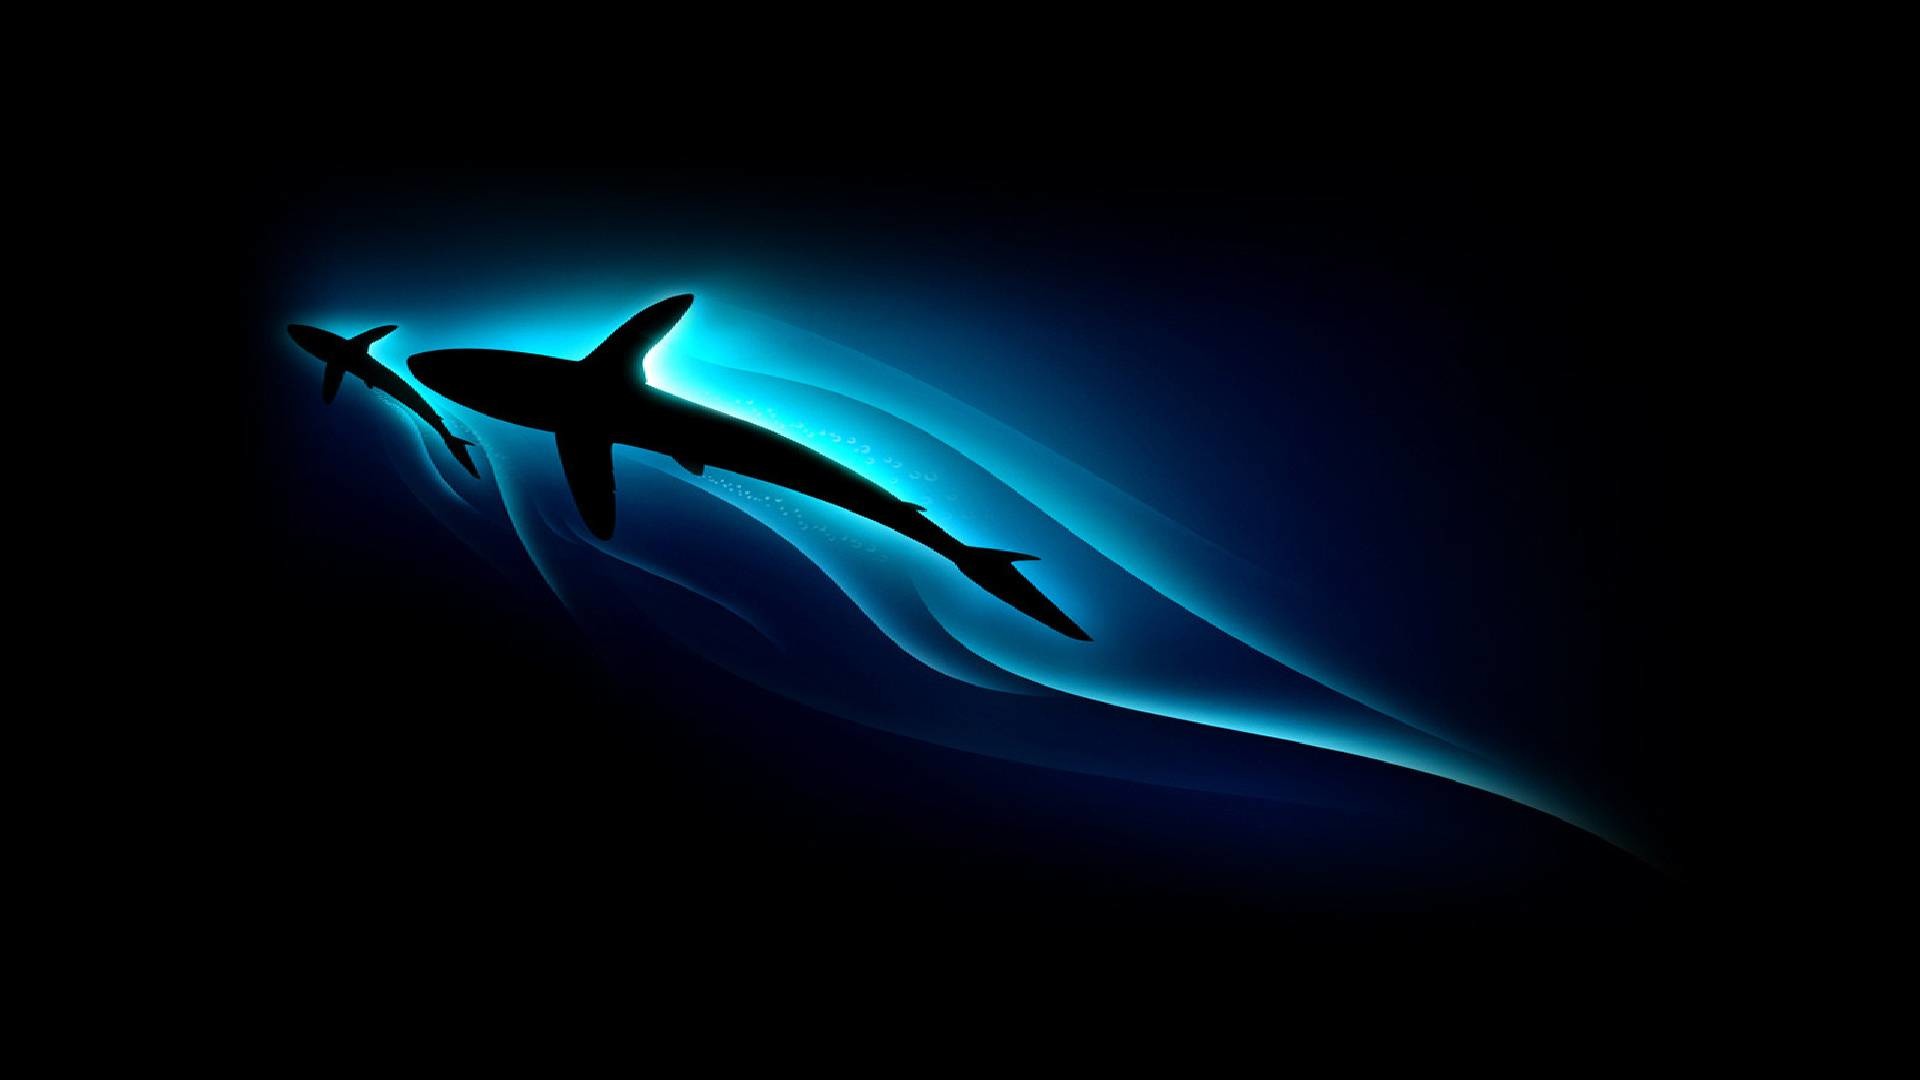 1920x1080 Download Cool Desktop Wallpapers pictures in high definition or .